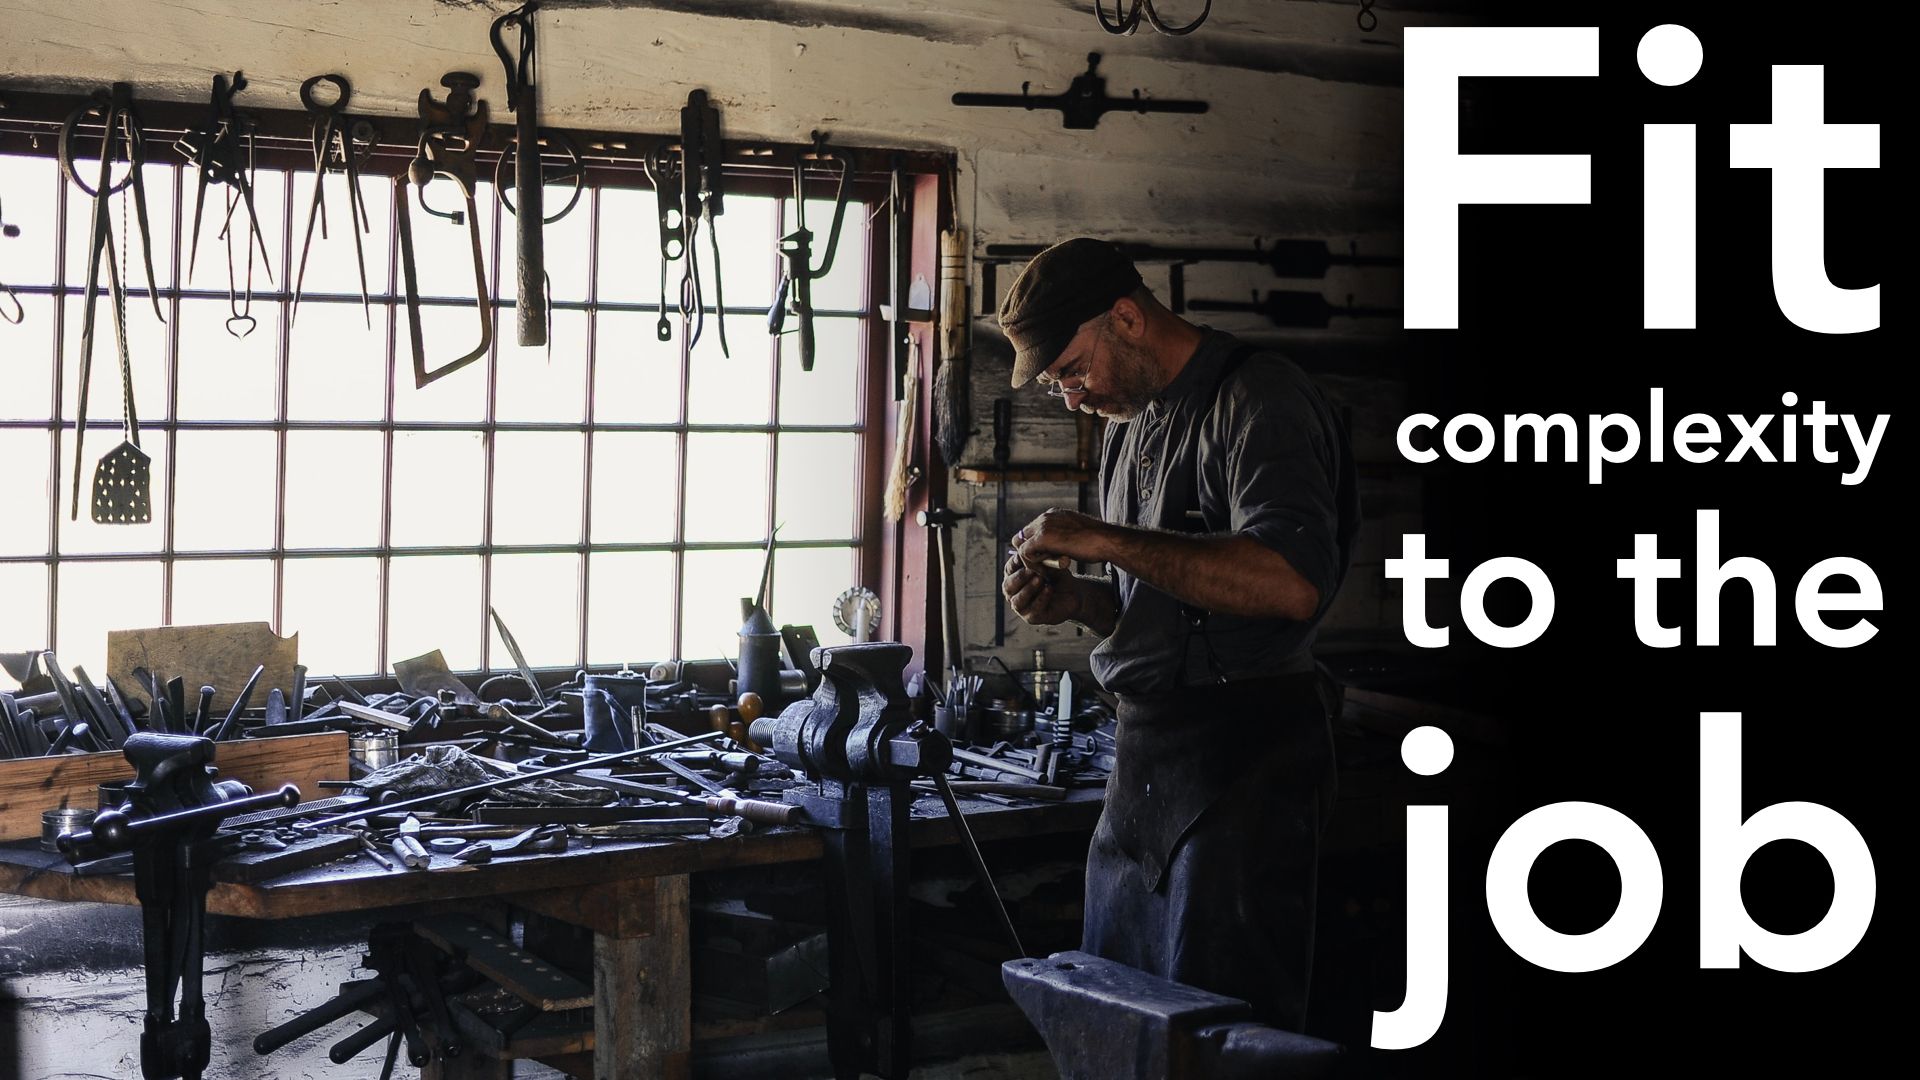 Slide text "Fit complexity to the job", with an image of a blacksmith next to a workbench with many tools on and above it